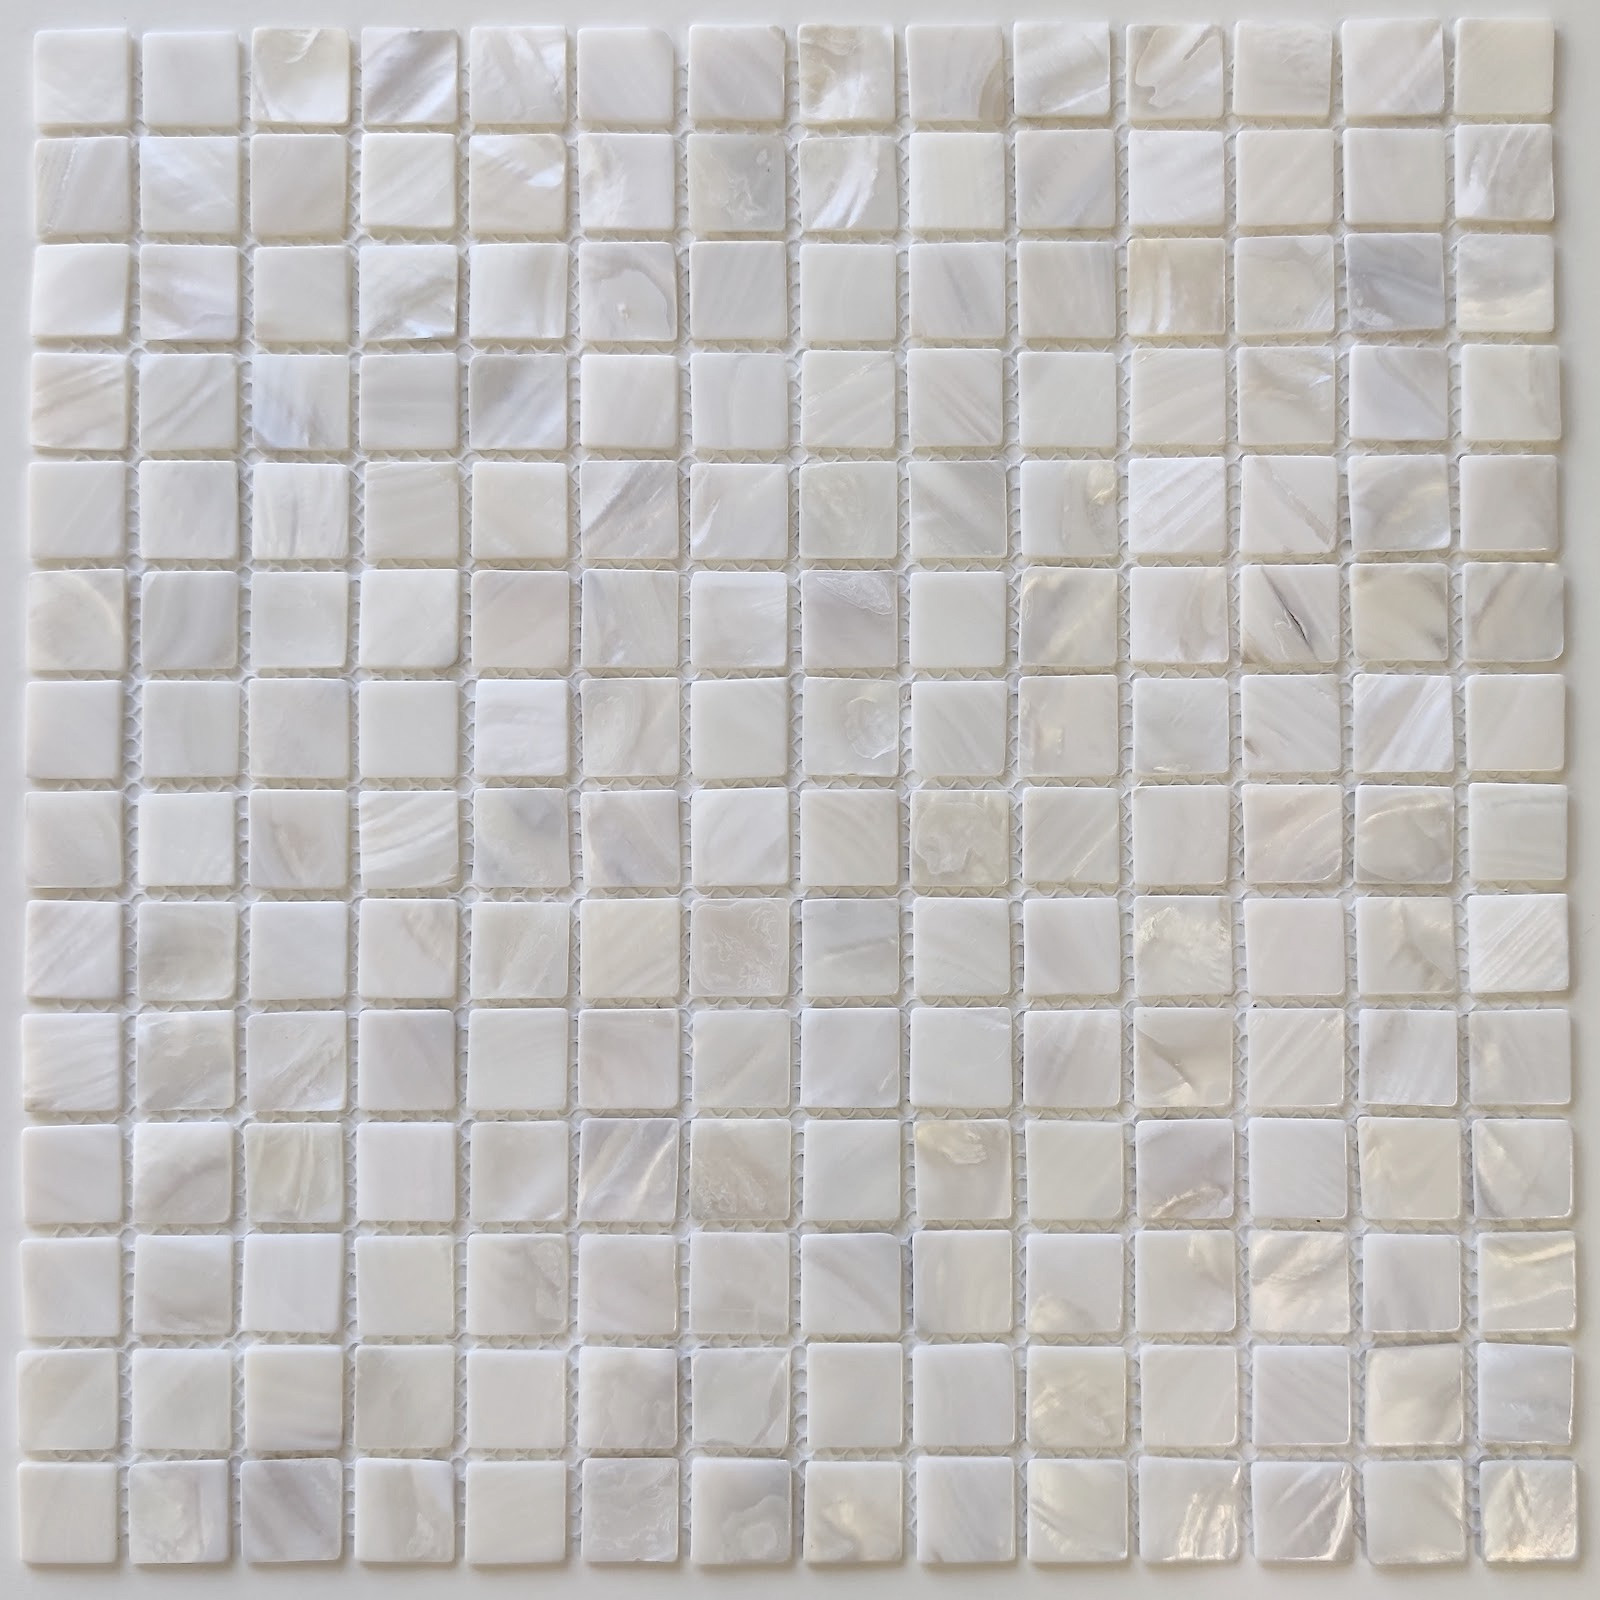 Mosaic Tile S For Shower Floor And, How To Tile A Bathroom Shower Floor